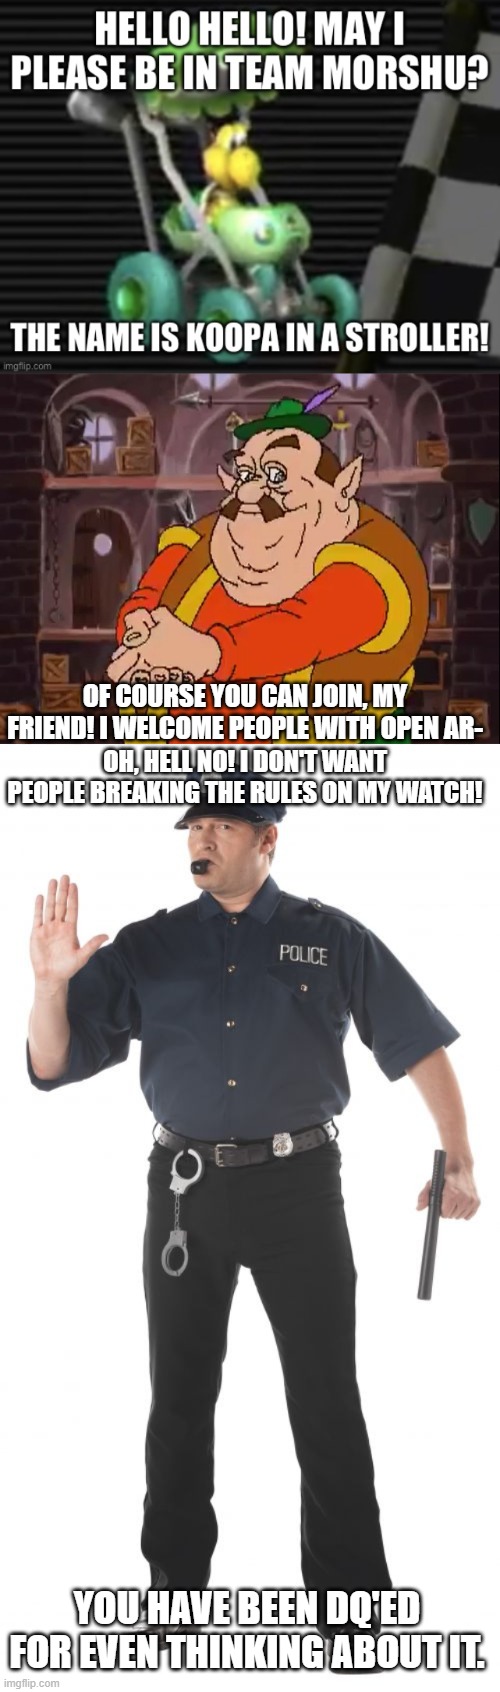 OF COURSE YOU CAN JOIN, MY FRIEND! I WELCOME PEOPLE WITH OPEN AR-; OH, HELL NO! I DON'T WANT PEOPLE BREAKING THE RULES ON MY WATCH! YOU HAVE BEEN DQ'ED FOR EVEN THINKING ABOUT IT. | image tagged in morshu,memes,stop cop | made w/ Imgflip meme maker